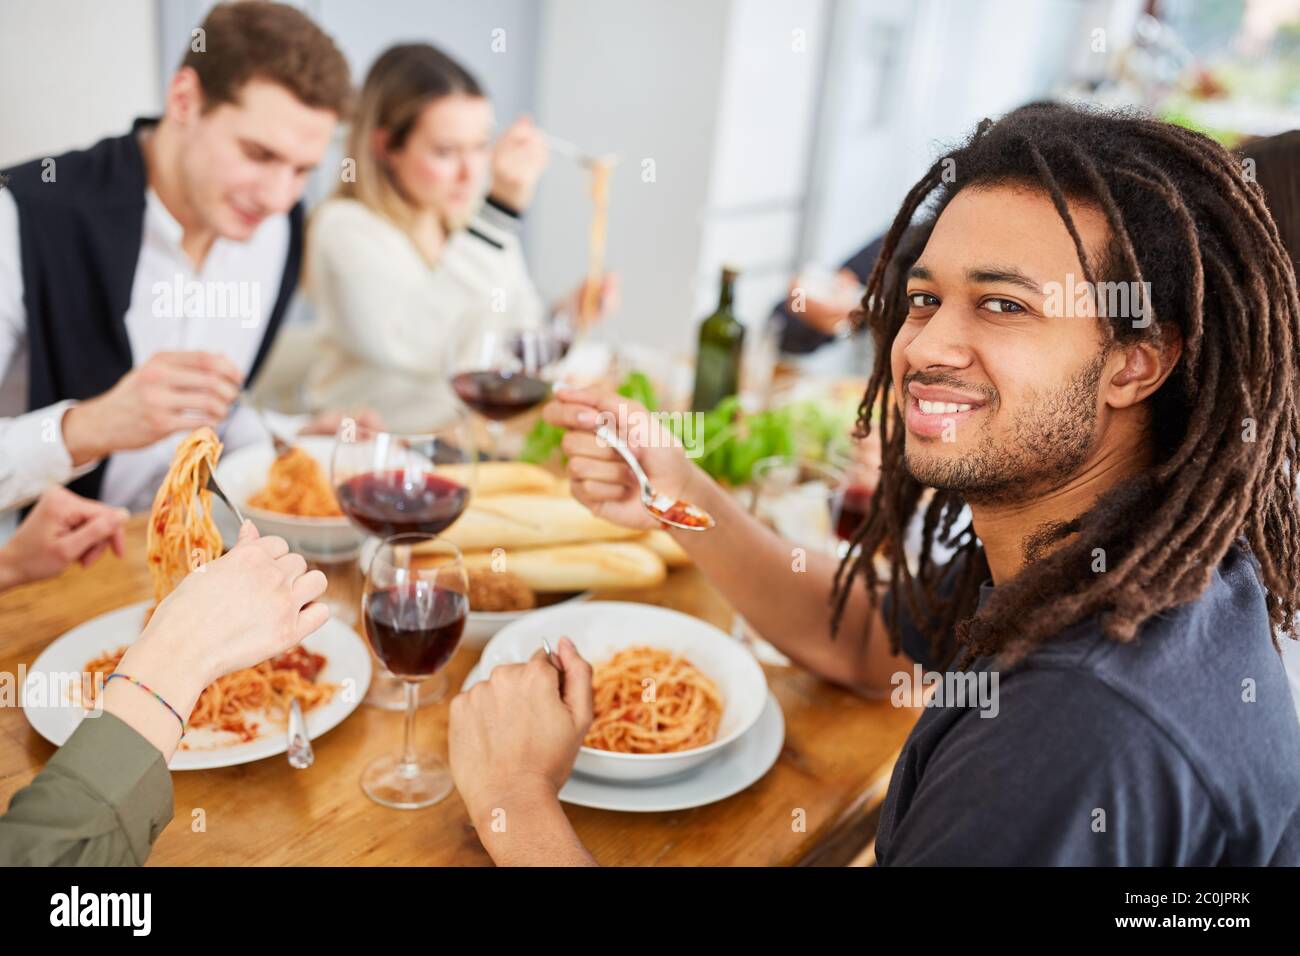 Man with dreadlocks with friends eating pasta together in the kitchen of a shared apartment Stock Photo